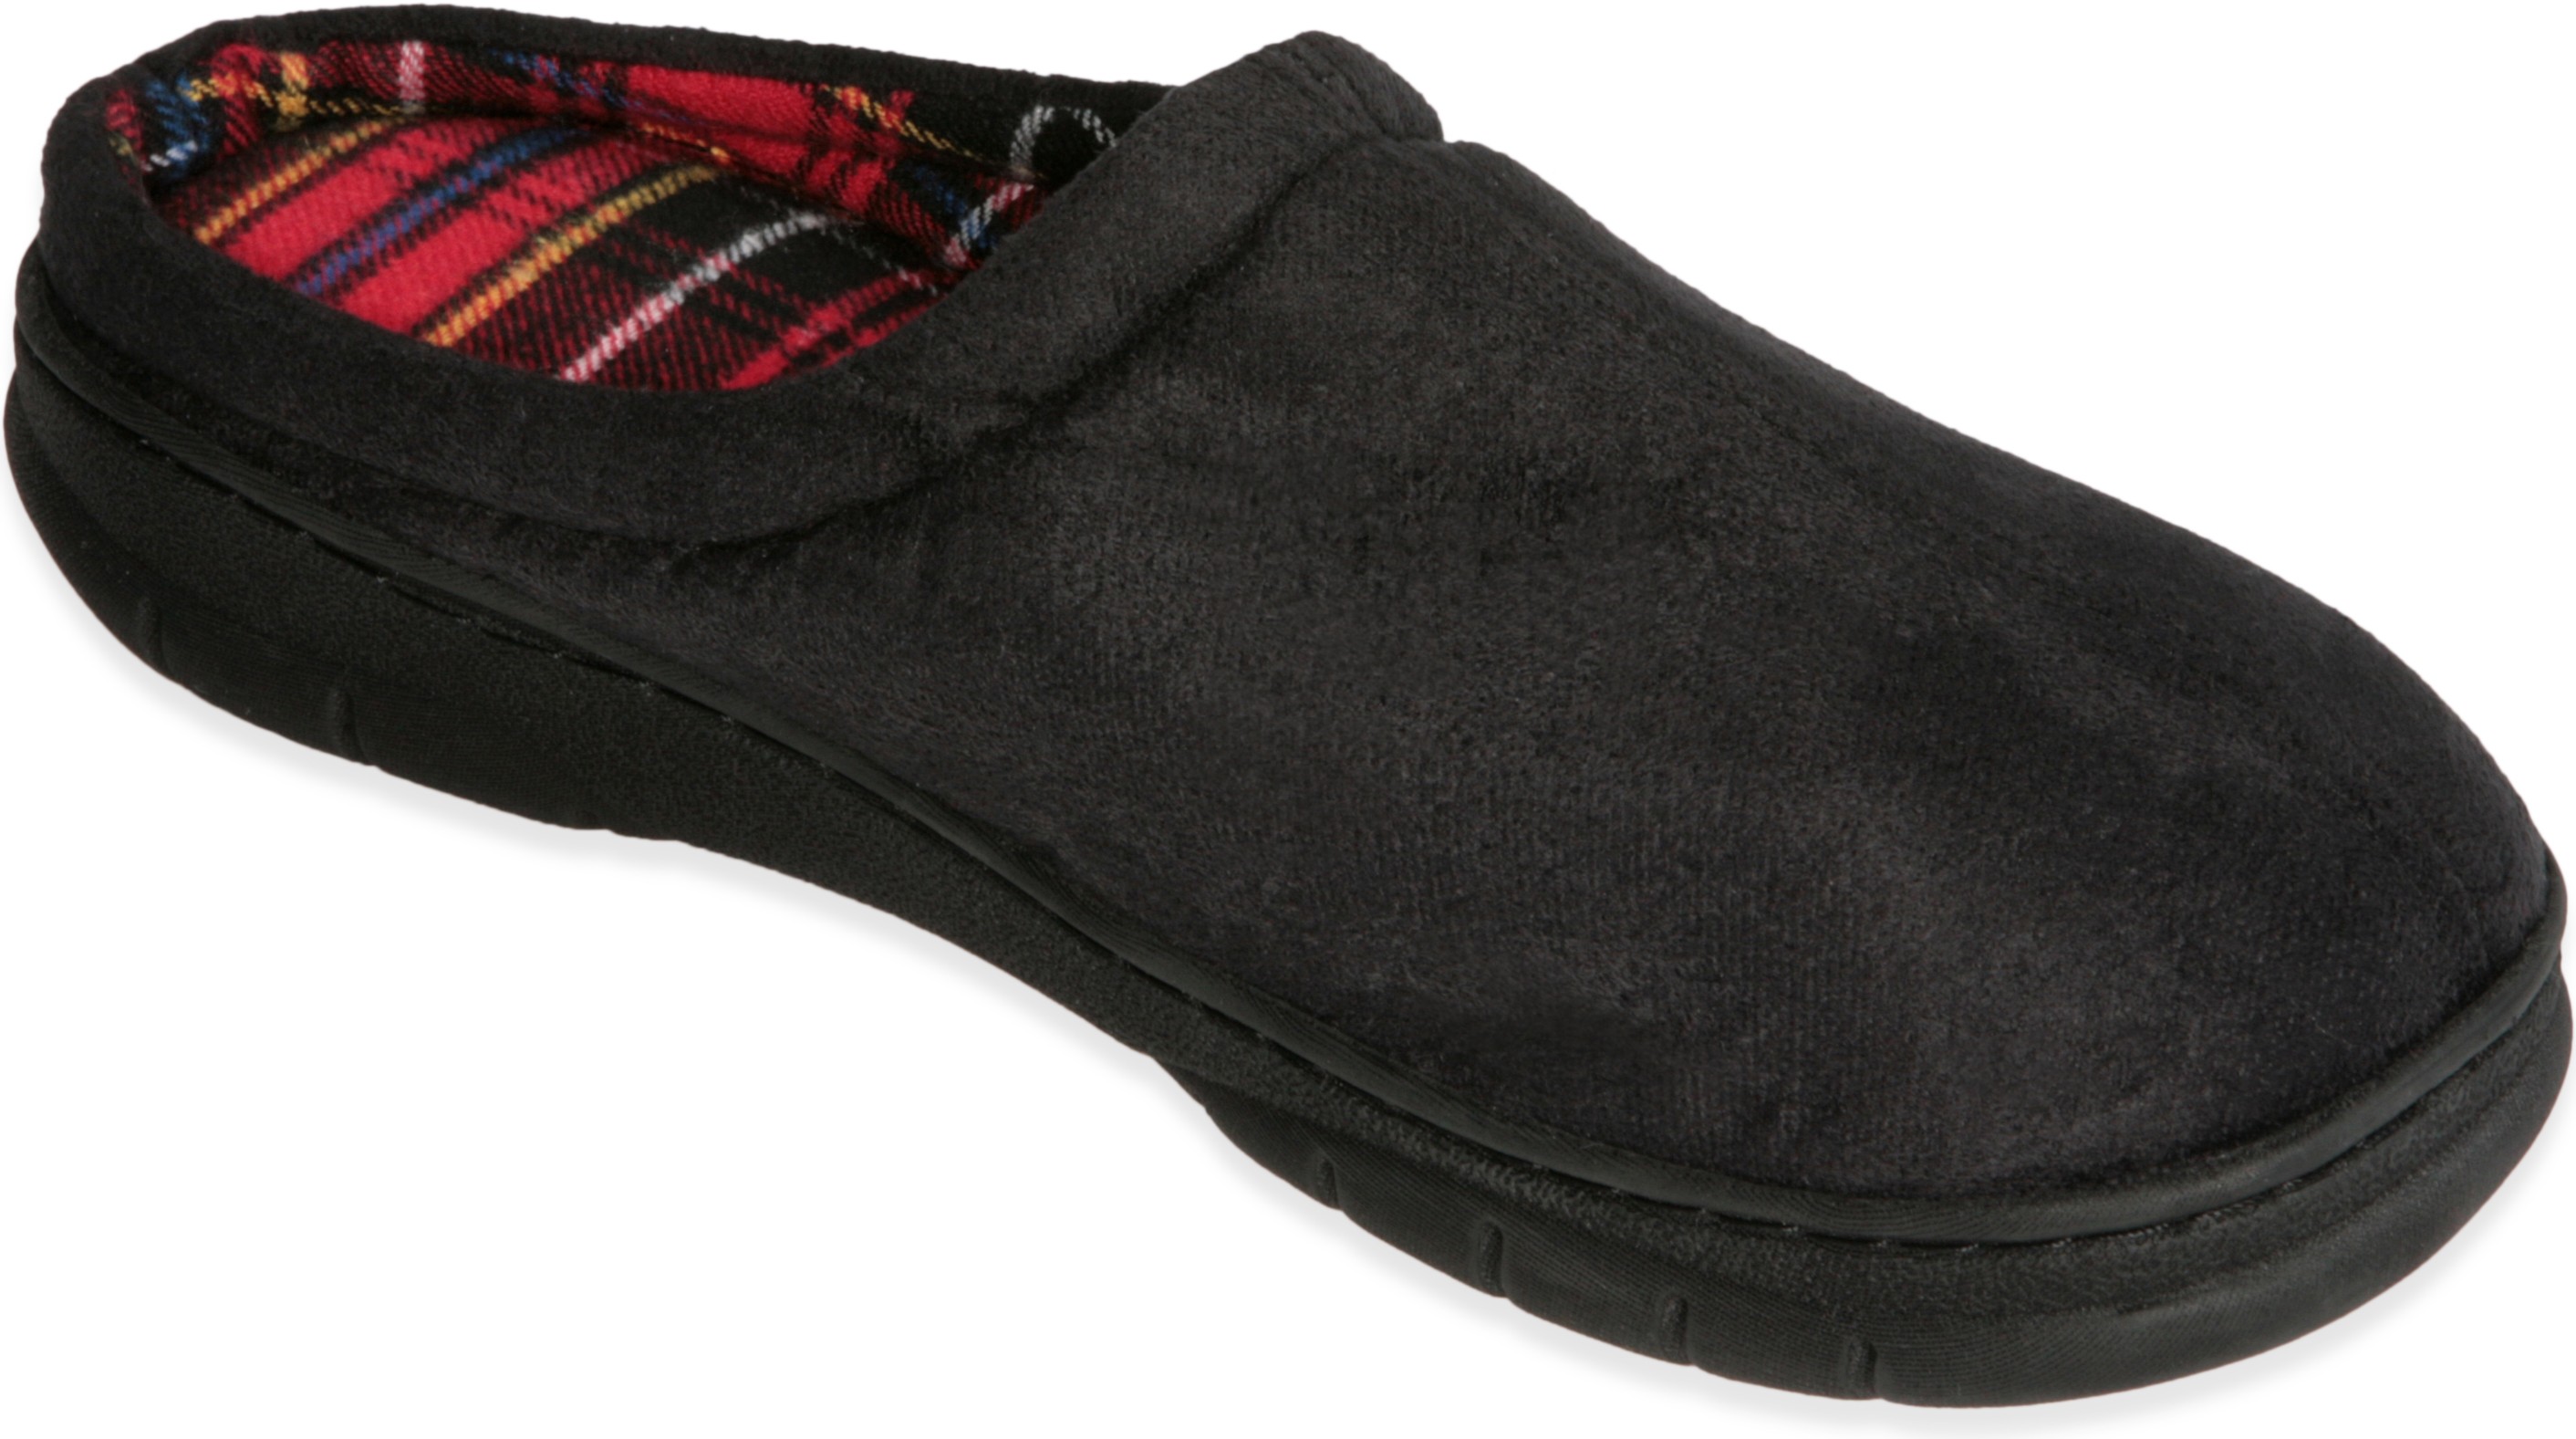 DeluxeComfort.com Deluxe Comfort Mens Memory Foam Slipper, Size 13-14 - Suede Vamp Checkered Lining - Foam - Strong TPR Outsole - Mens Slippers, Black